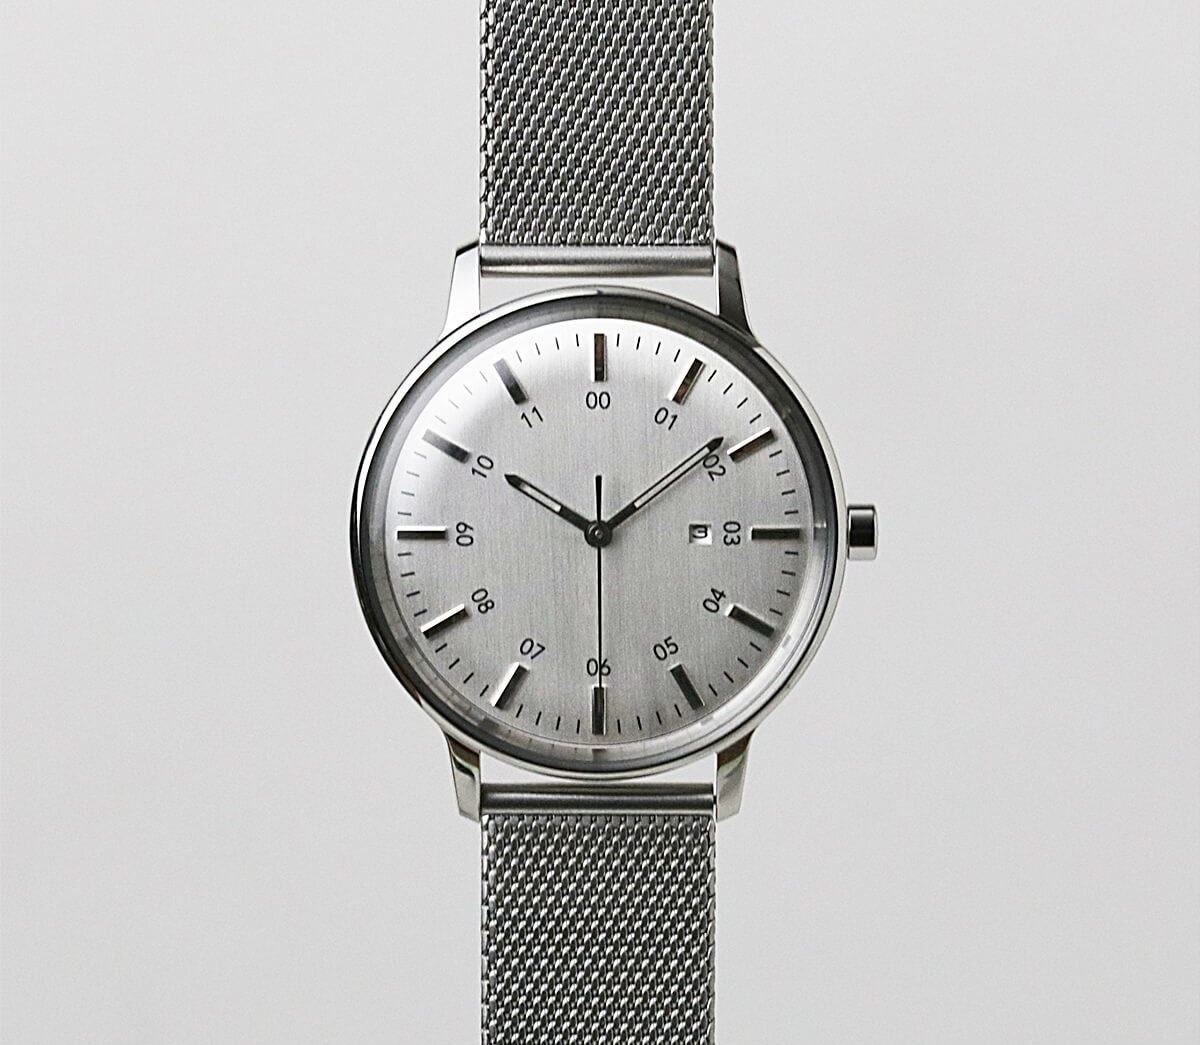 Sazaré's latest watch adds a touch of the 70s - Acquire